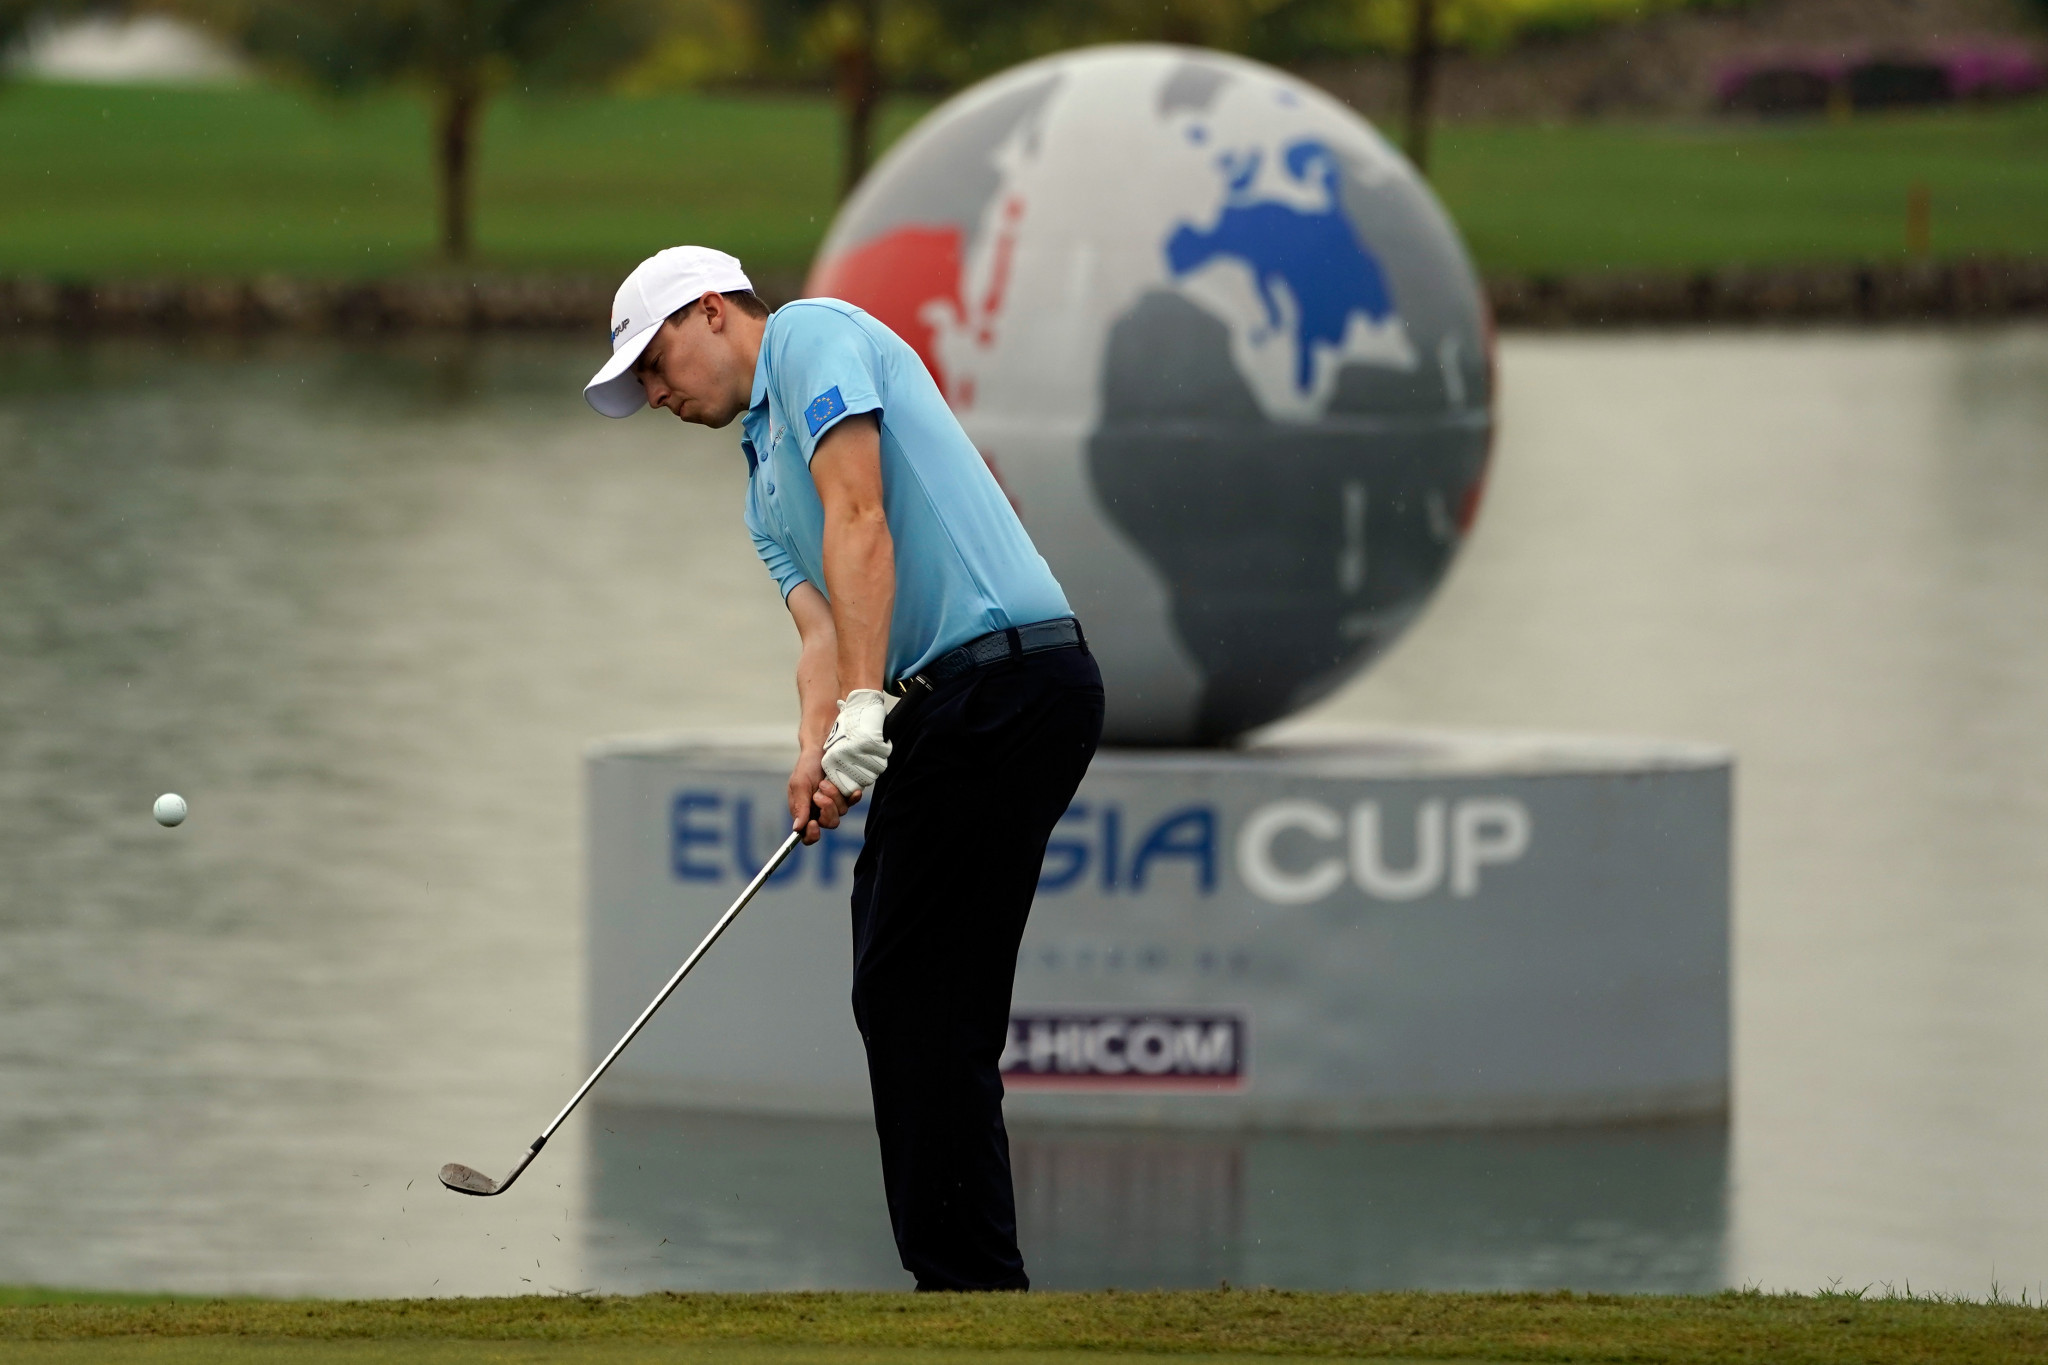 Matt Fitzpatrick of Team Europe in action during the foursome matches at the EurAsia Cup ©Getty Images